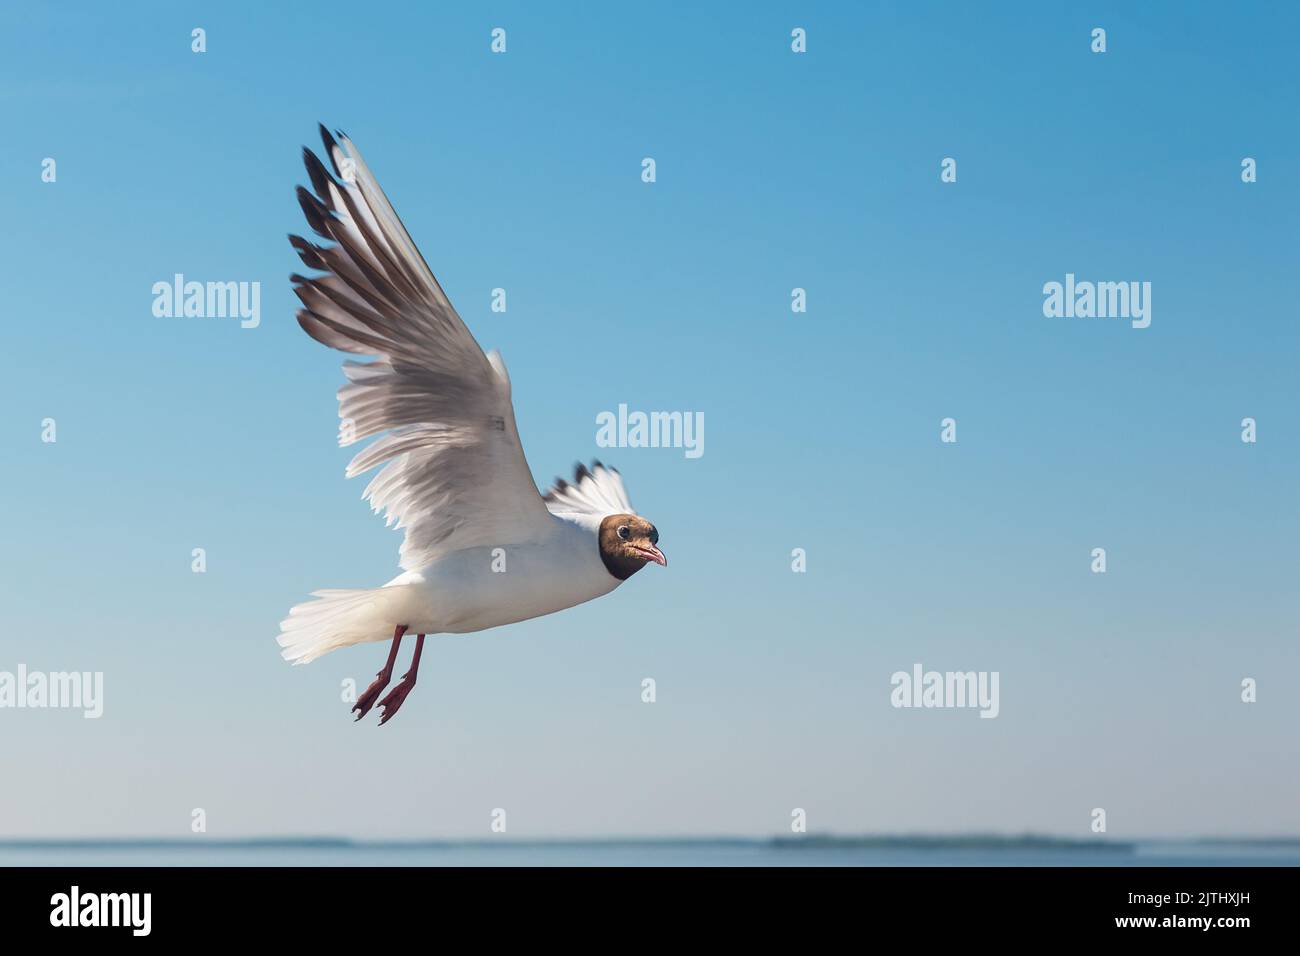 Seagull in flight against the blue sky close-up Stock Photo